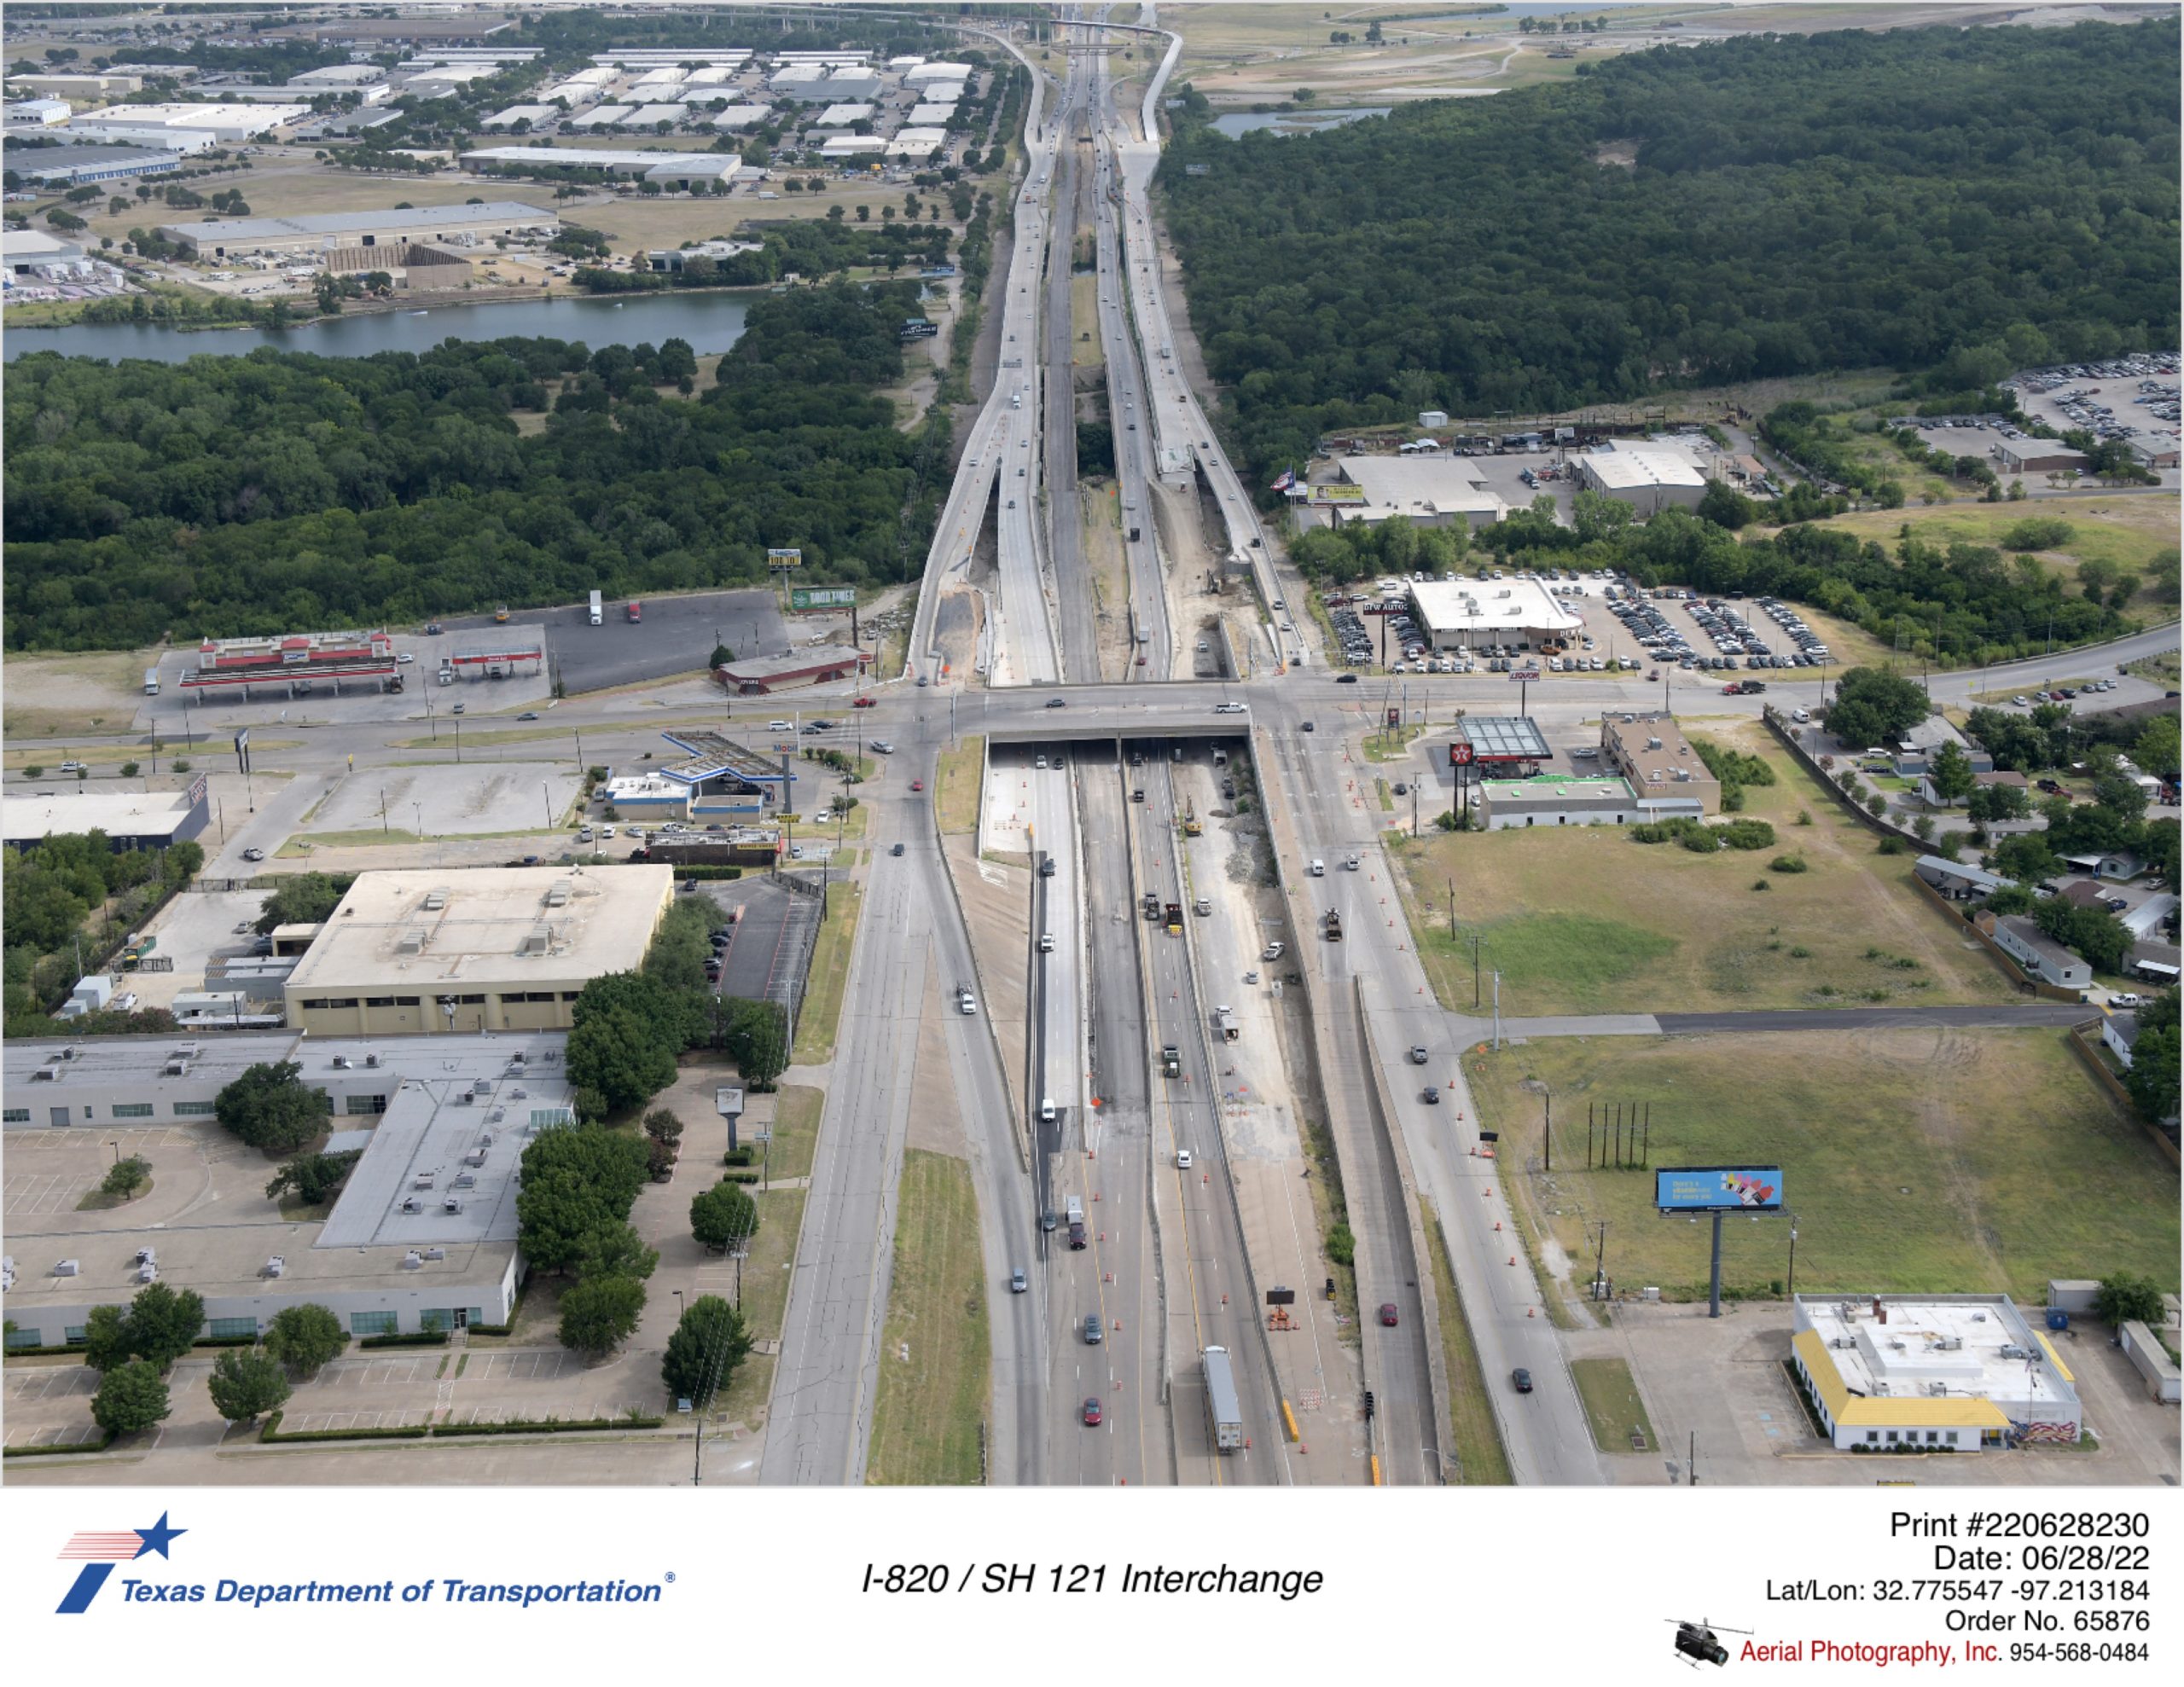 I-820 looking north at Randol Mill Rd interchange. Construction of new northbound and southbound mainlanes are shown.